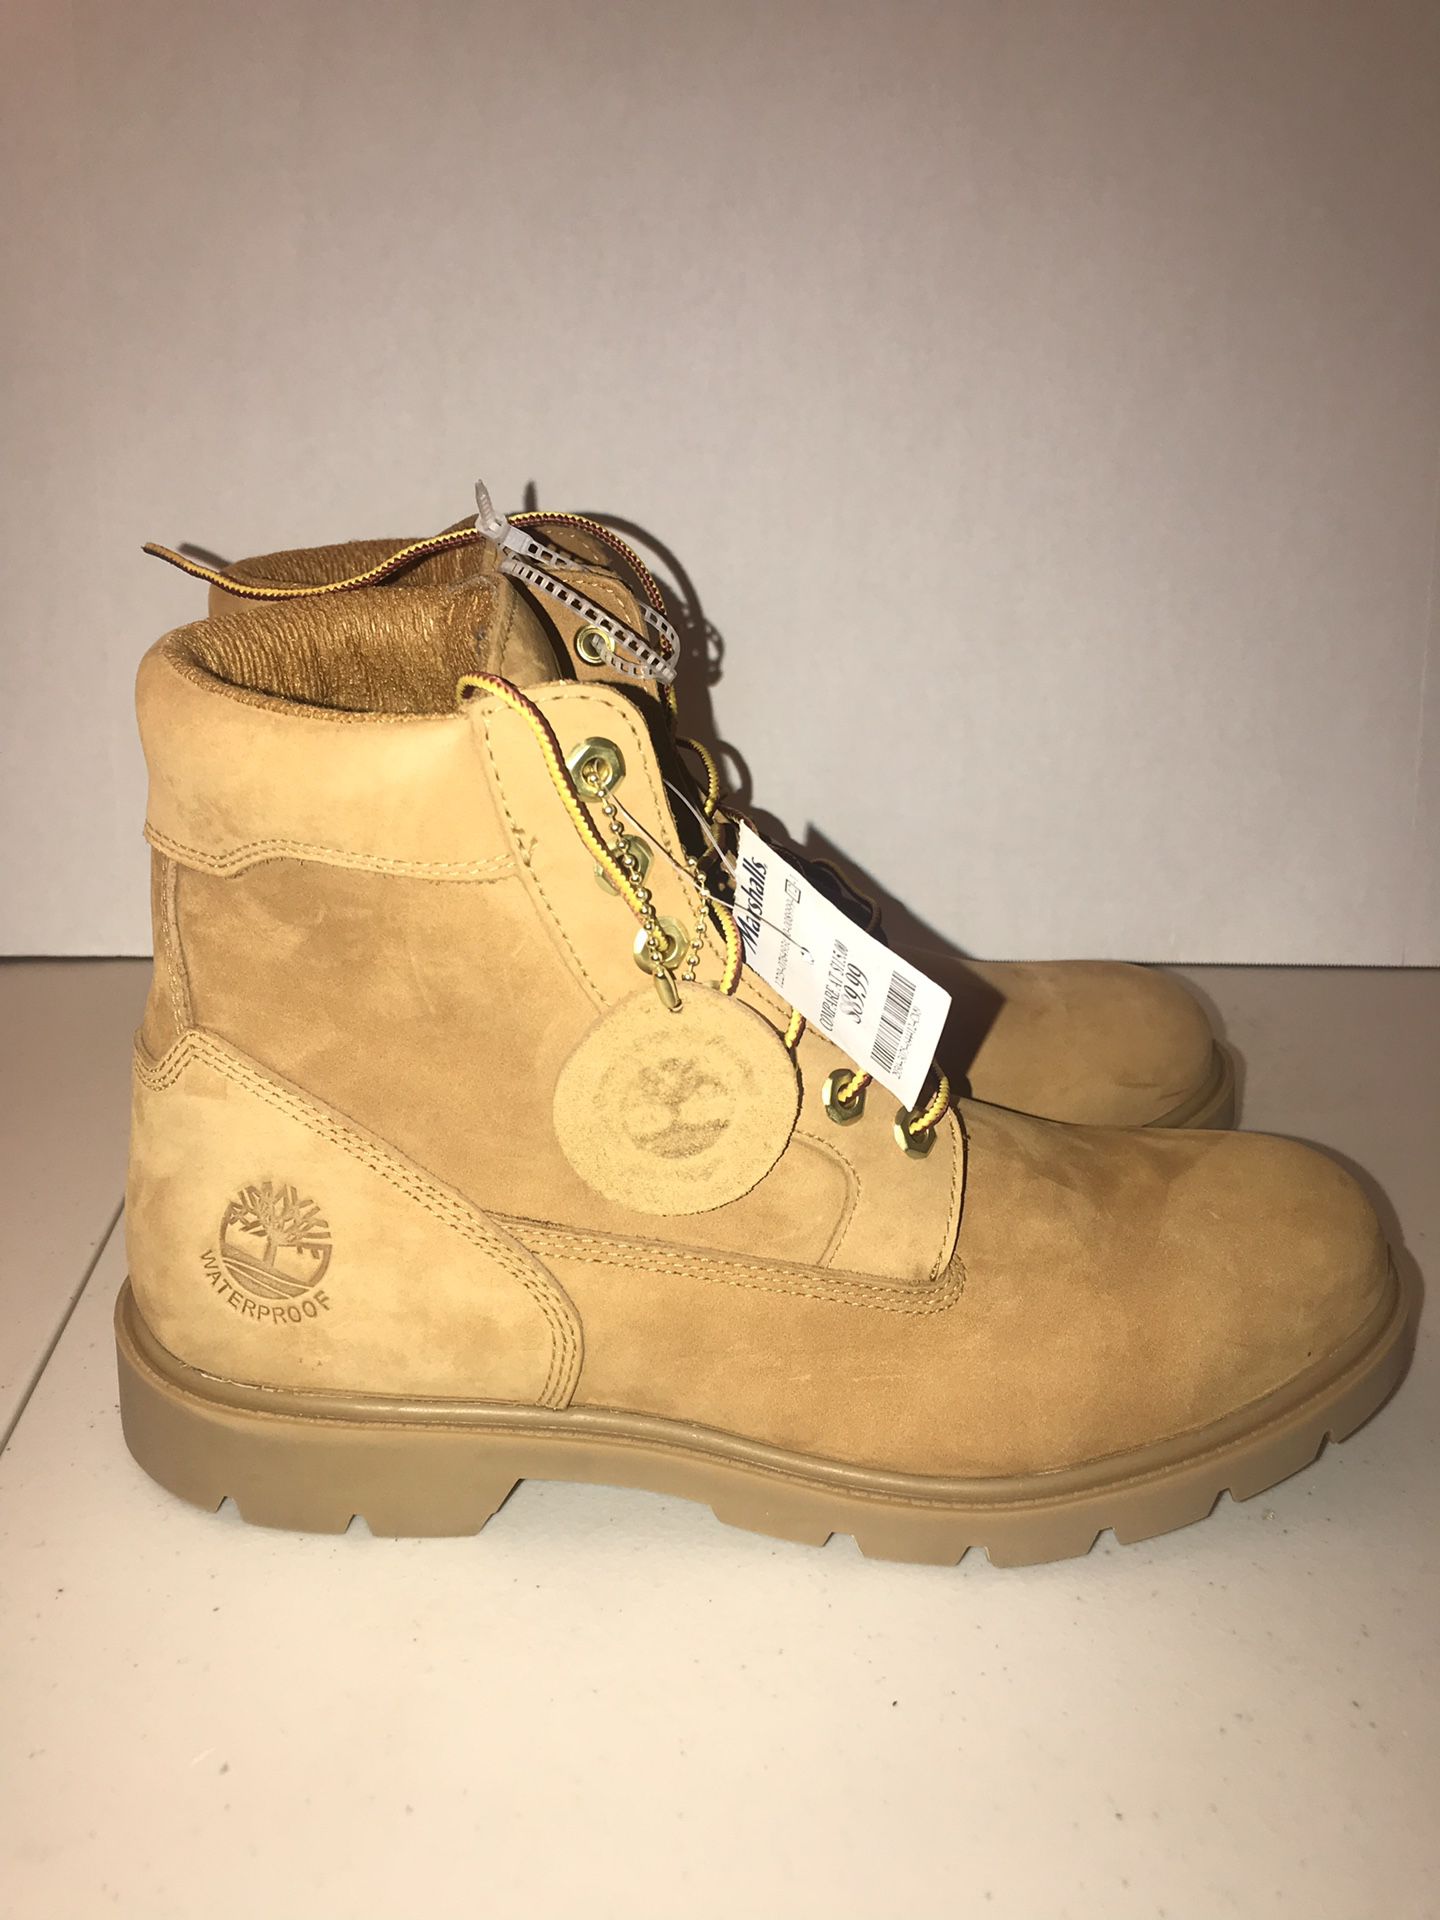 NEW TIMBERLAND BOOT SIZE 9.5 WHEAT NUBUCK LEATHER 6 INCH WORK MEN'S 19079